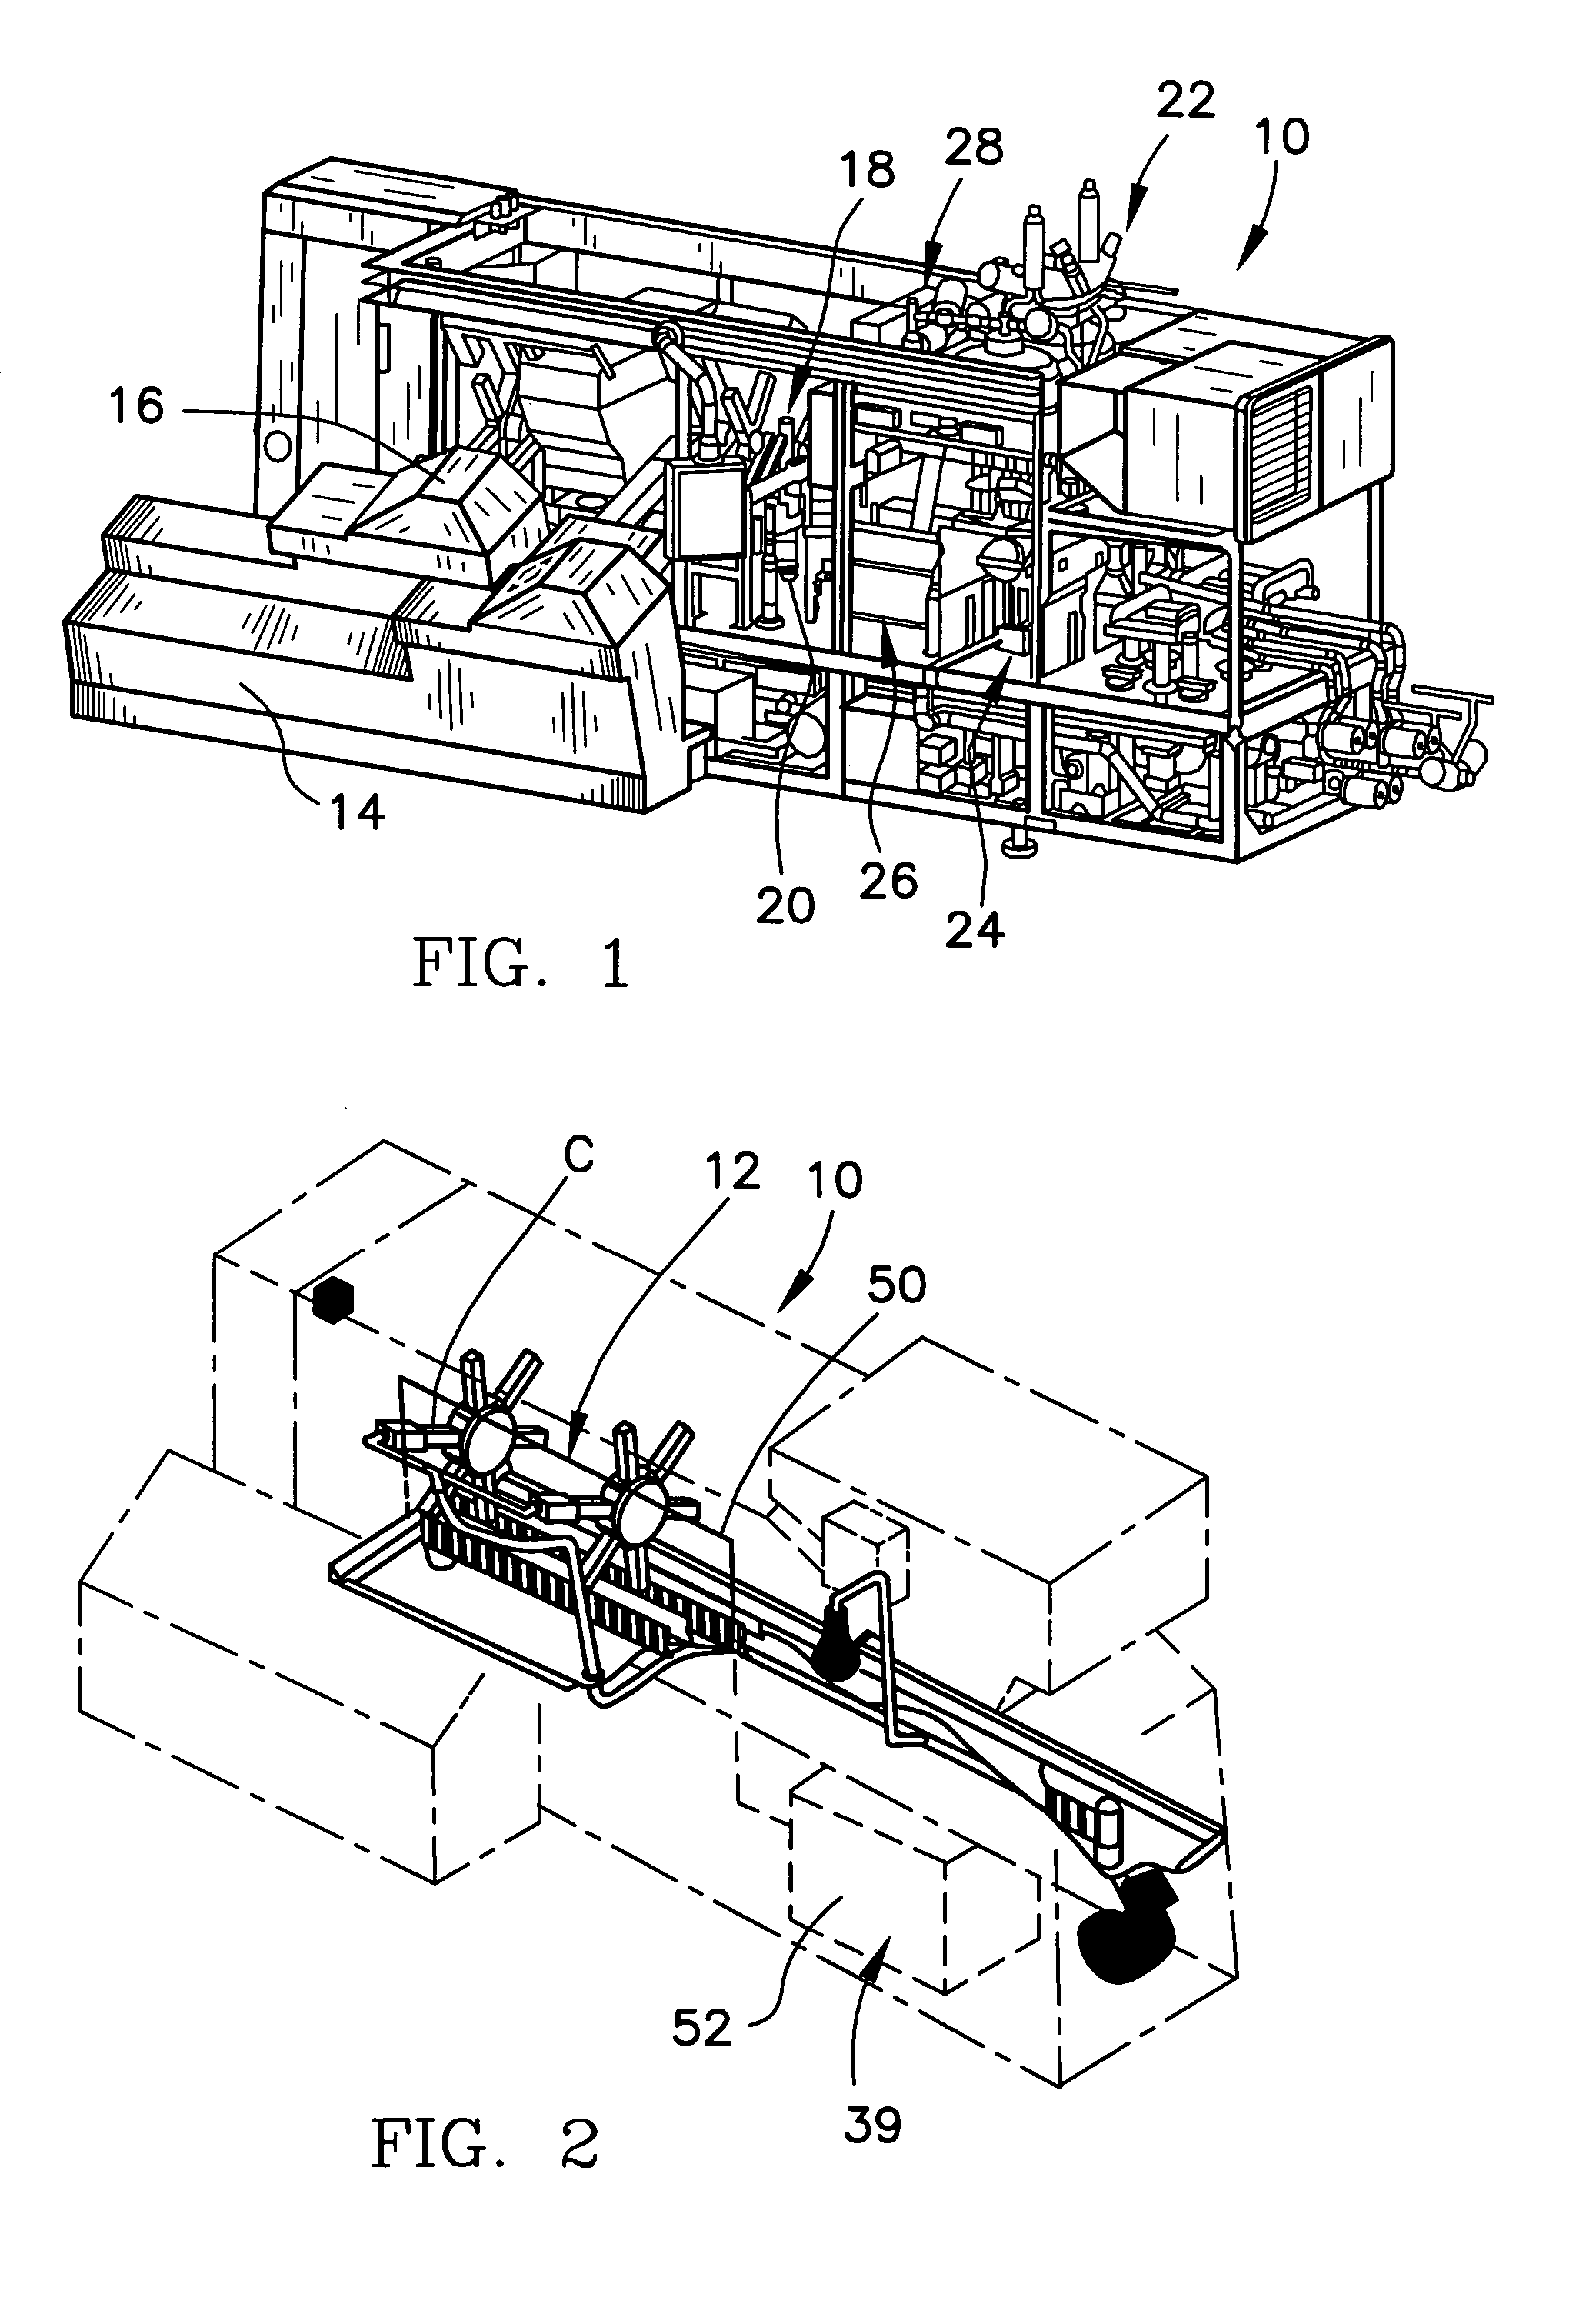 System for automatic/continuous sterilization of packaging machine components